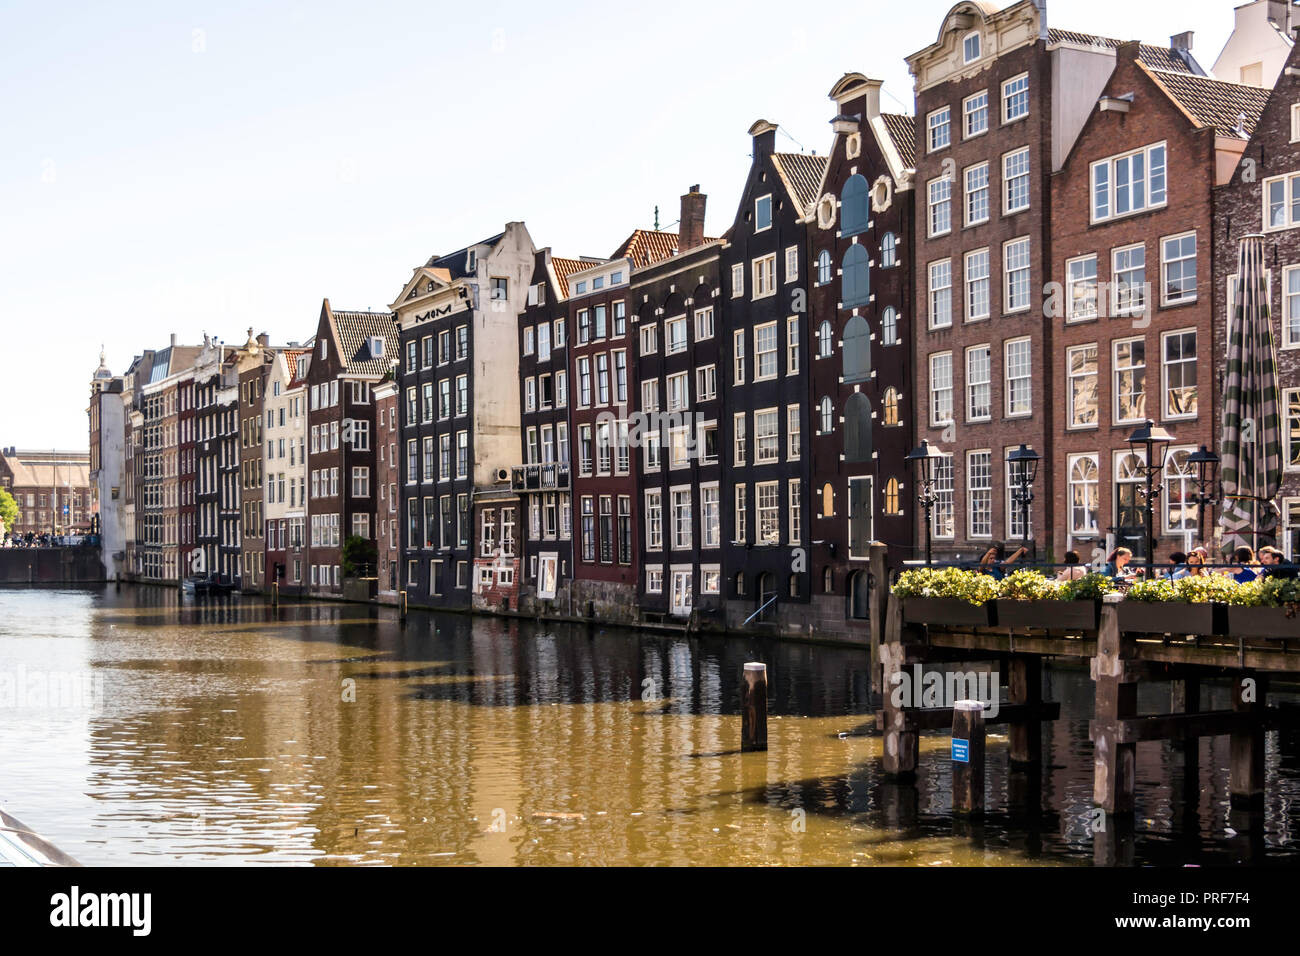 Picturesque traditional canal houses with gabled facades along the street. Stock Photo